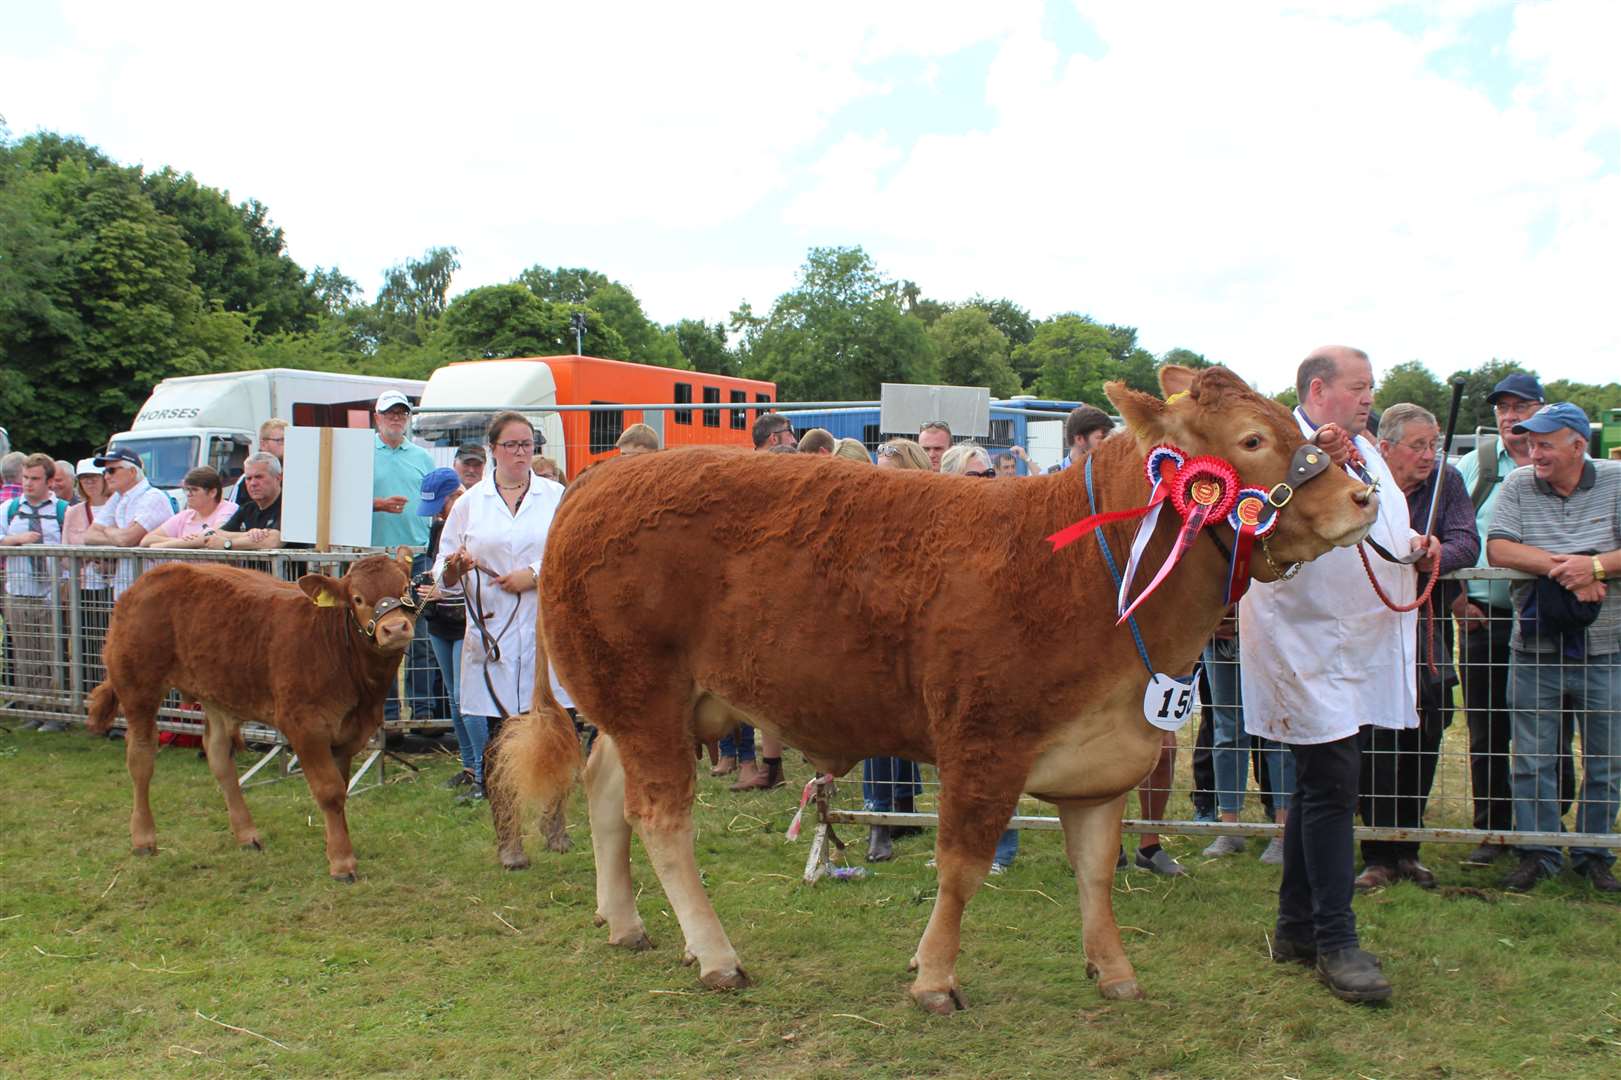 The Limousin breed winner Breconside Prickles with calf. Picture: Kyle Ritchie